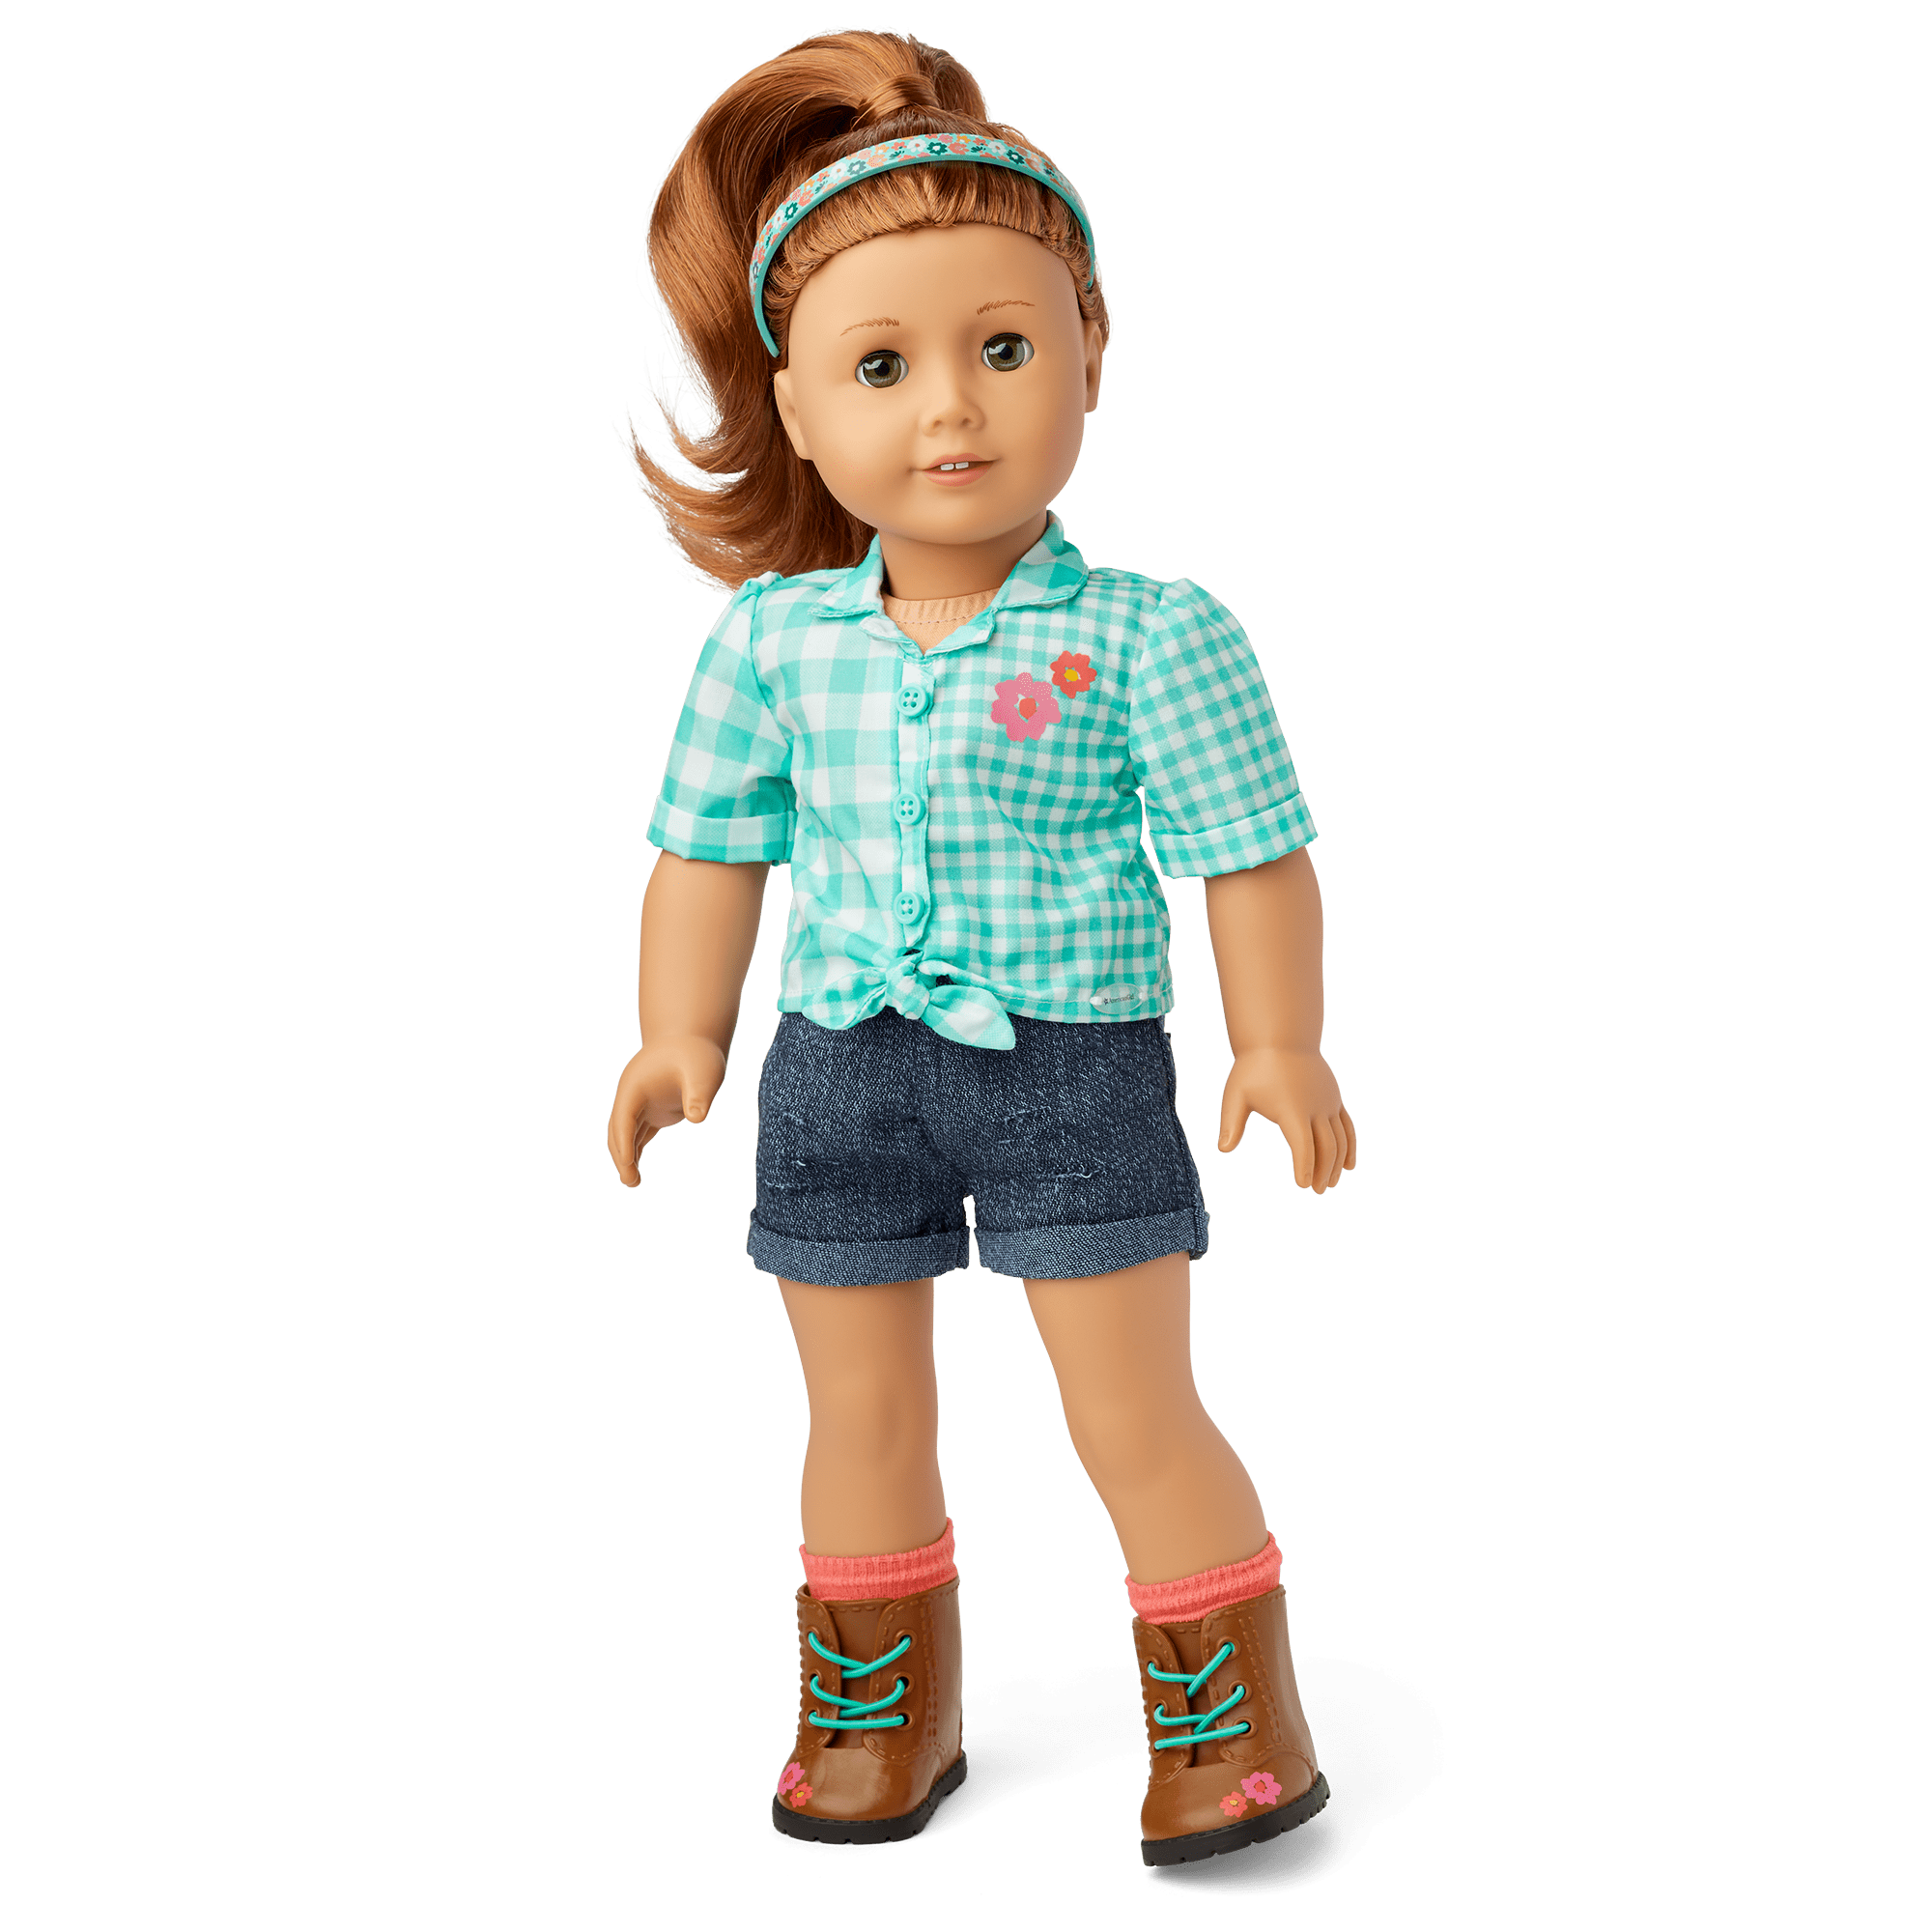 AMERICAN GIRL CAMPING OUTFIT DOLL CLOTHES LANTERN SMORE